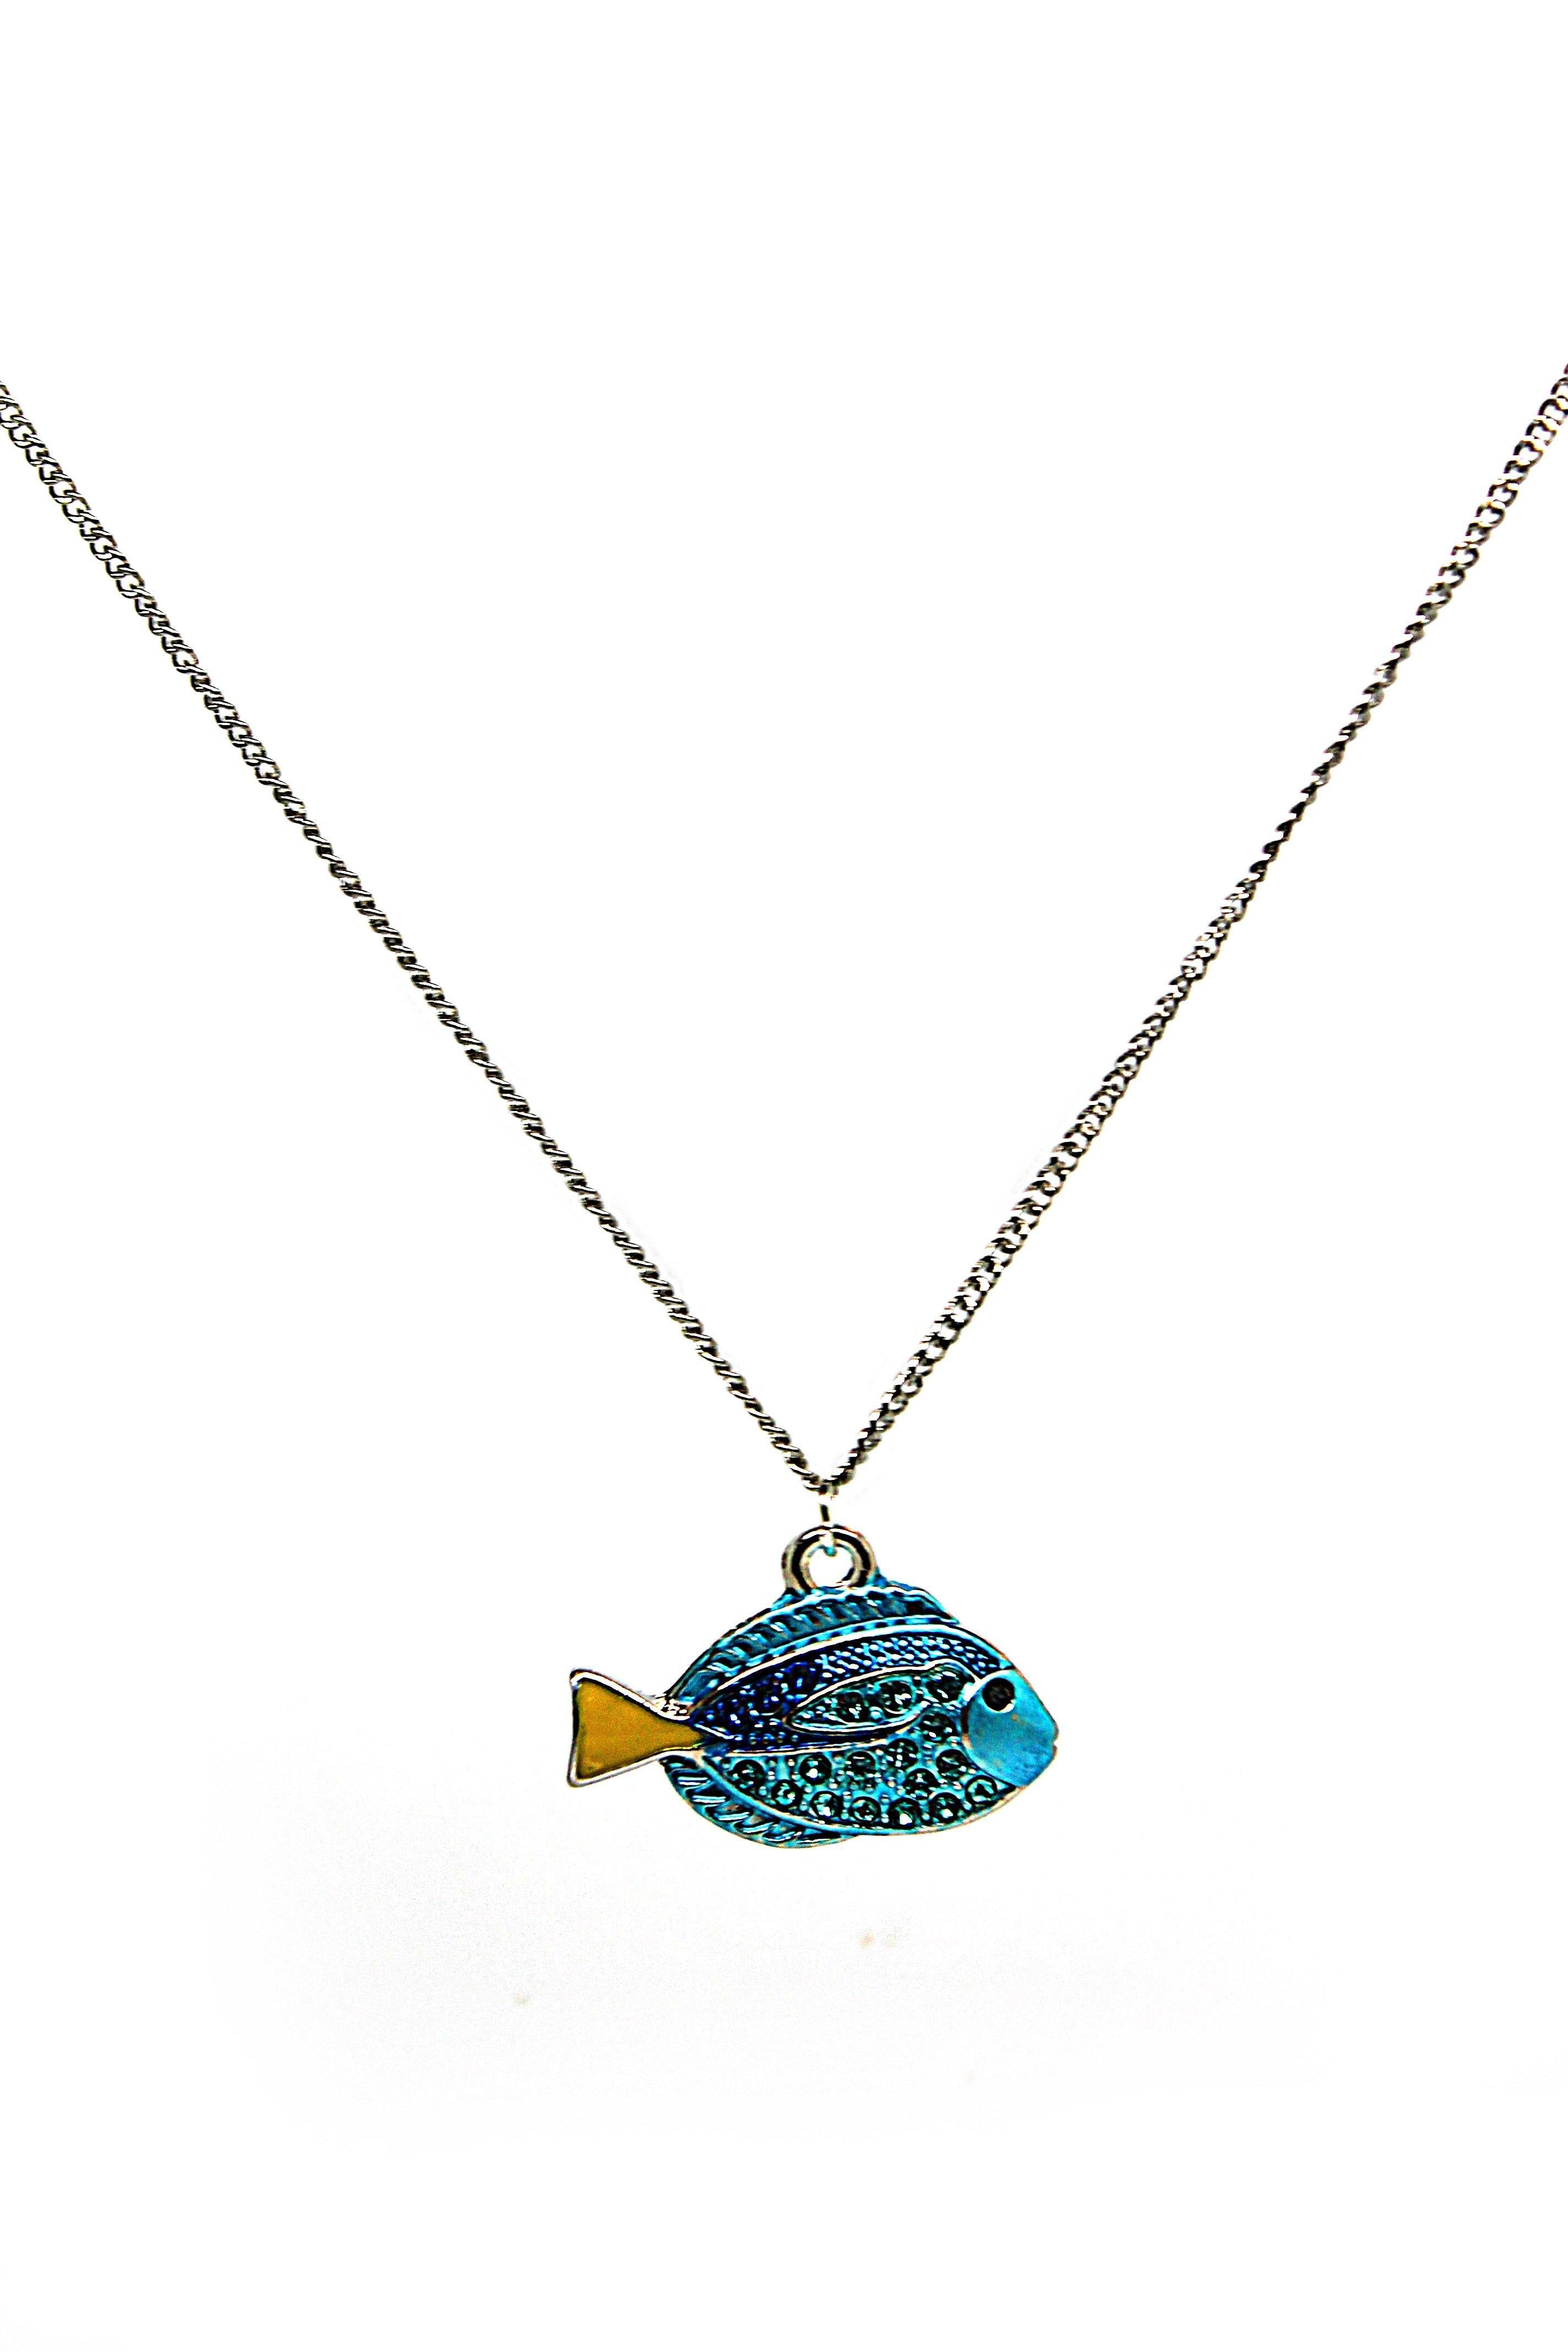 Blue Tang Fish Necklace - Wildtouch - Wildtouch